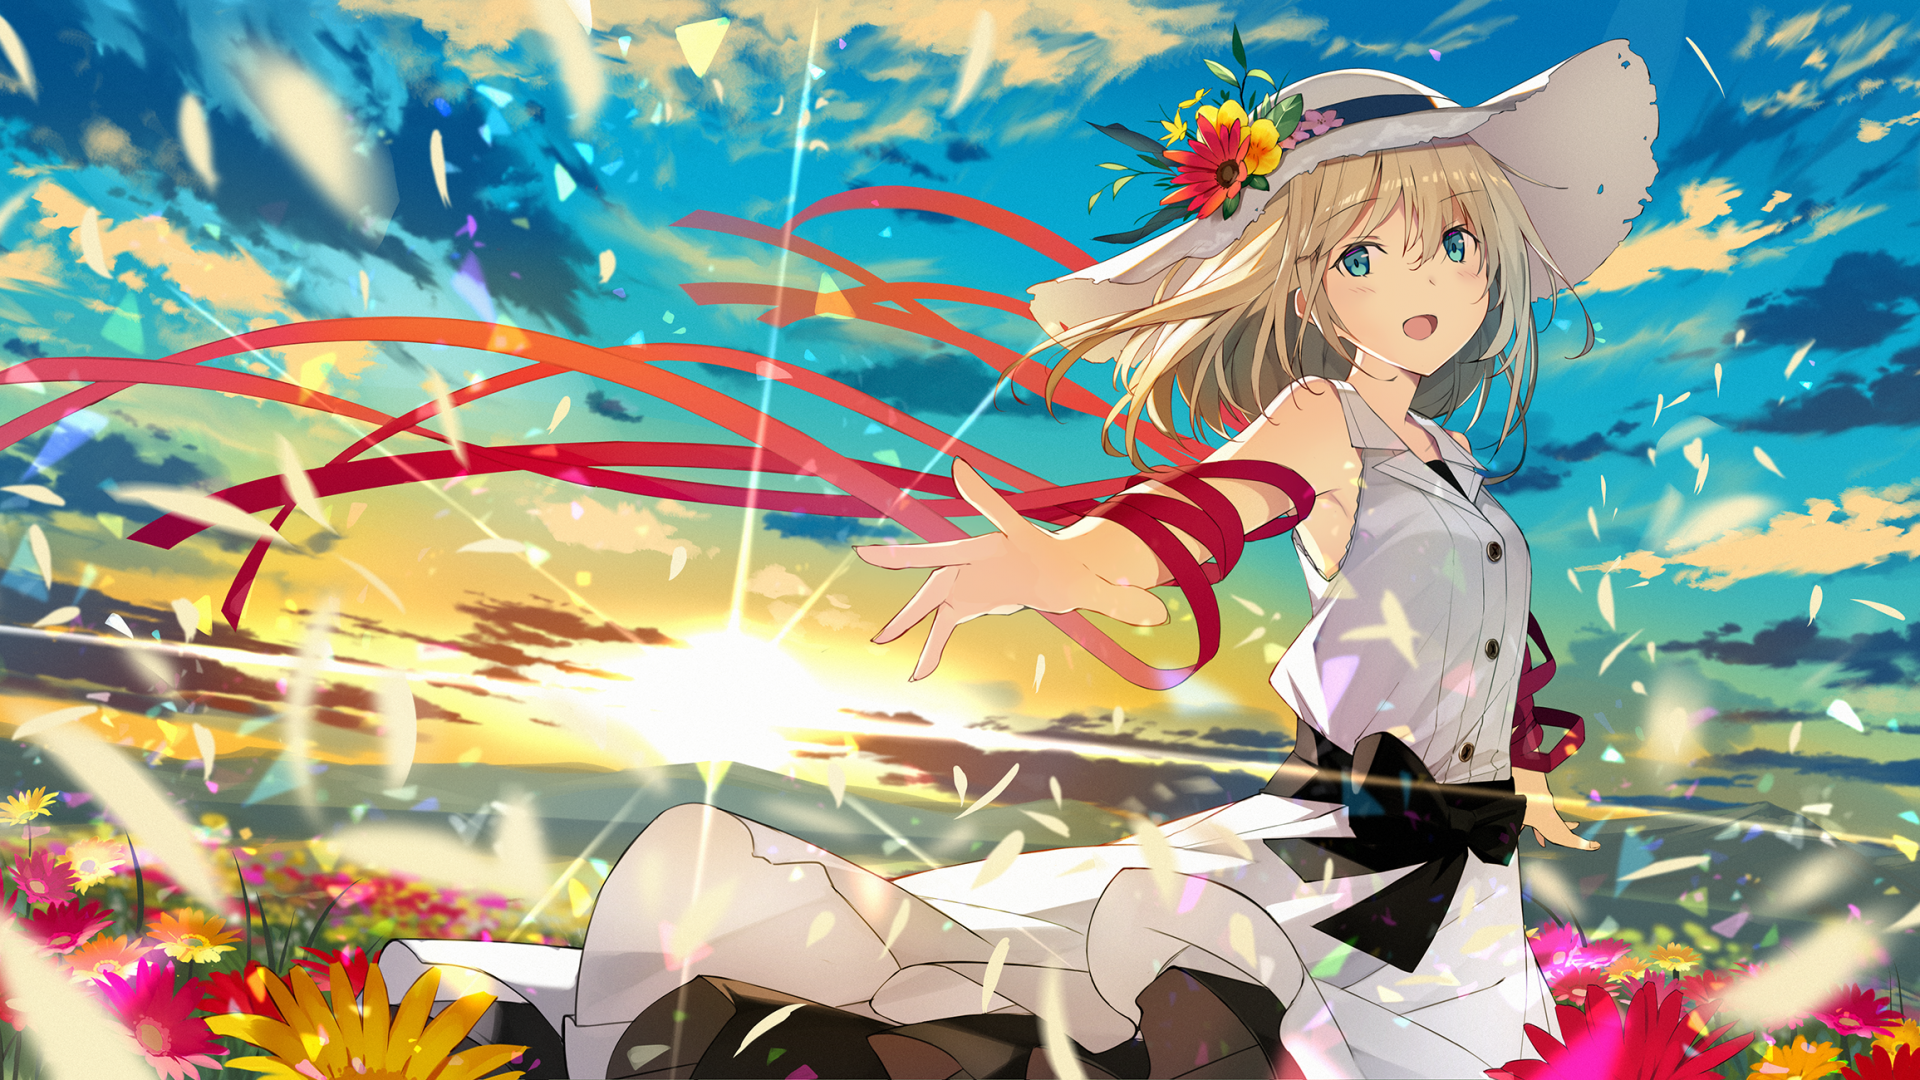 Download 1920x1080 Anime Girl, Colorful, Sunshine, Summer, Clouds